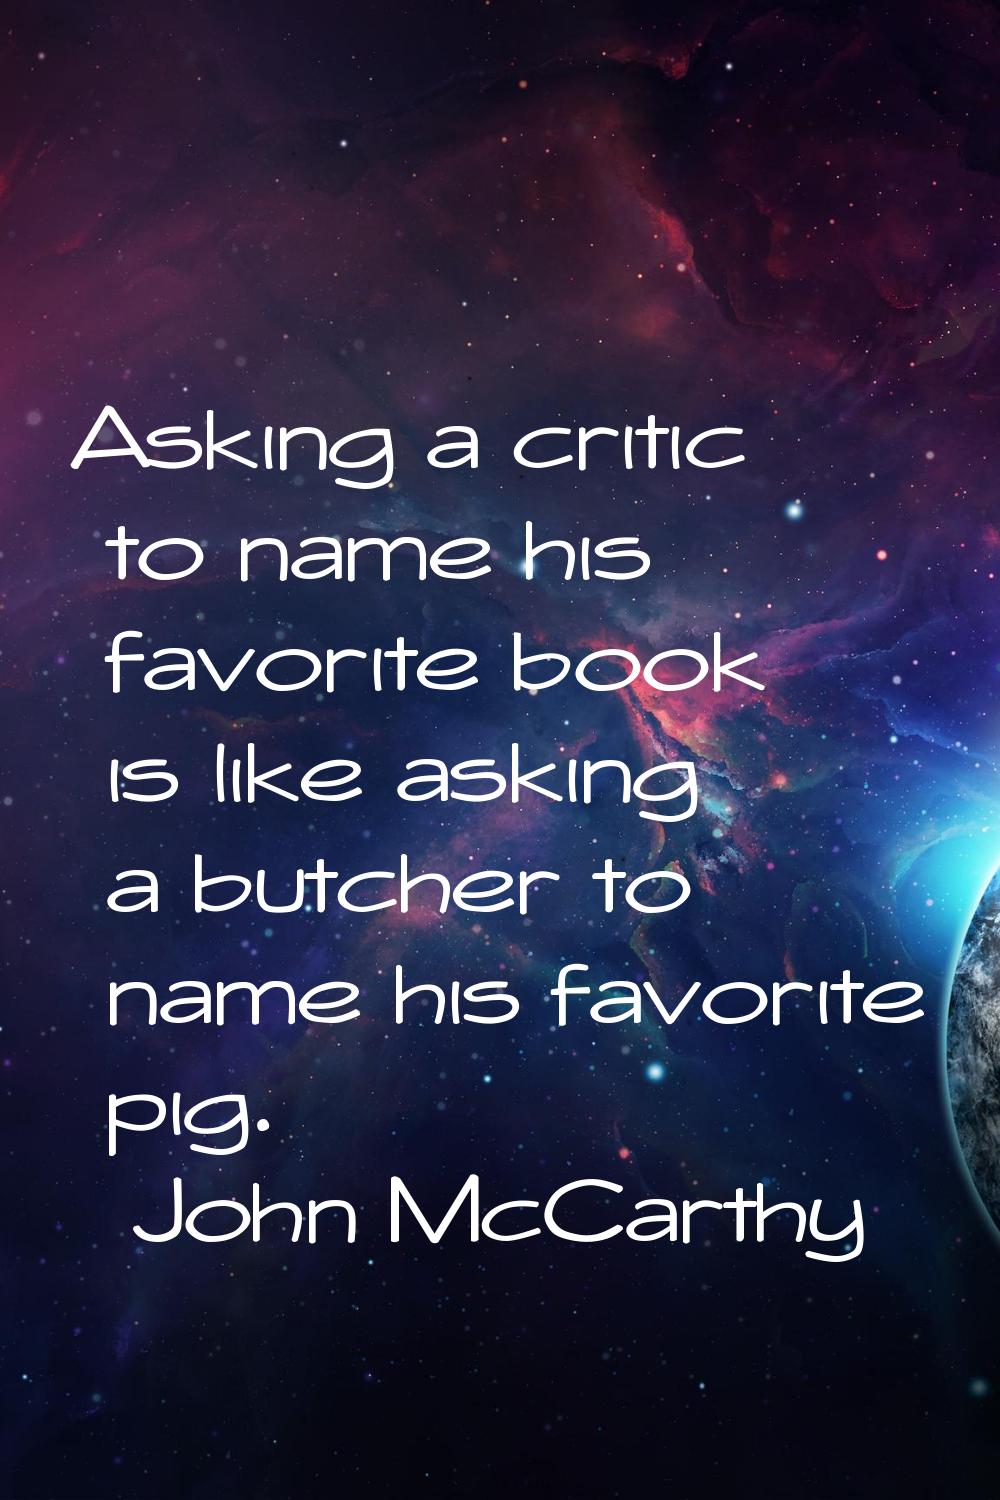 Asking a critic to name his favorite book is like asking a butcher to name his favorite pig.